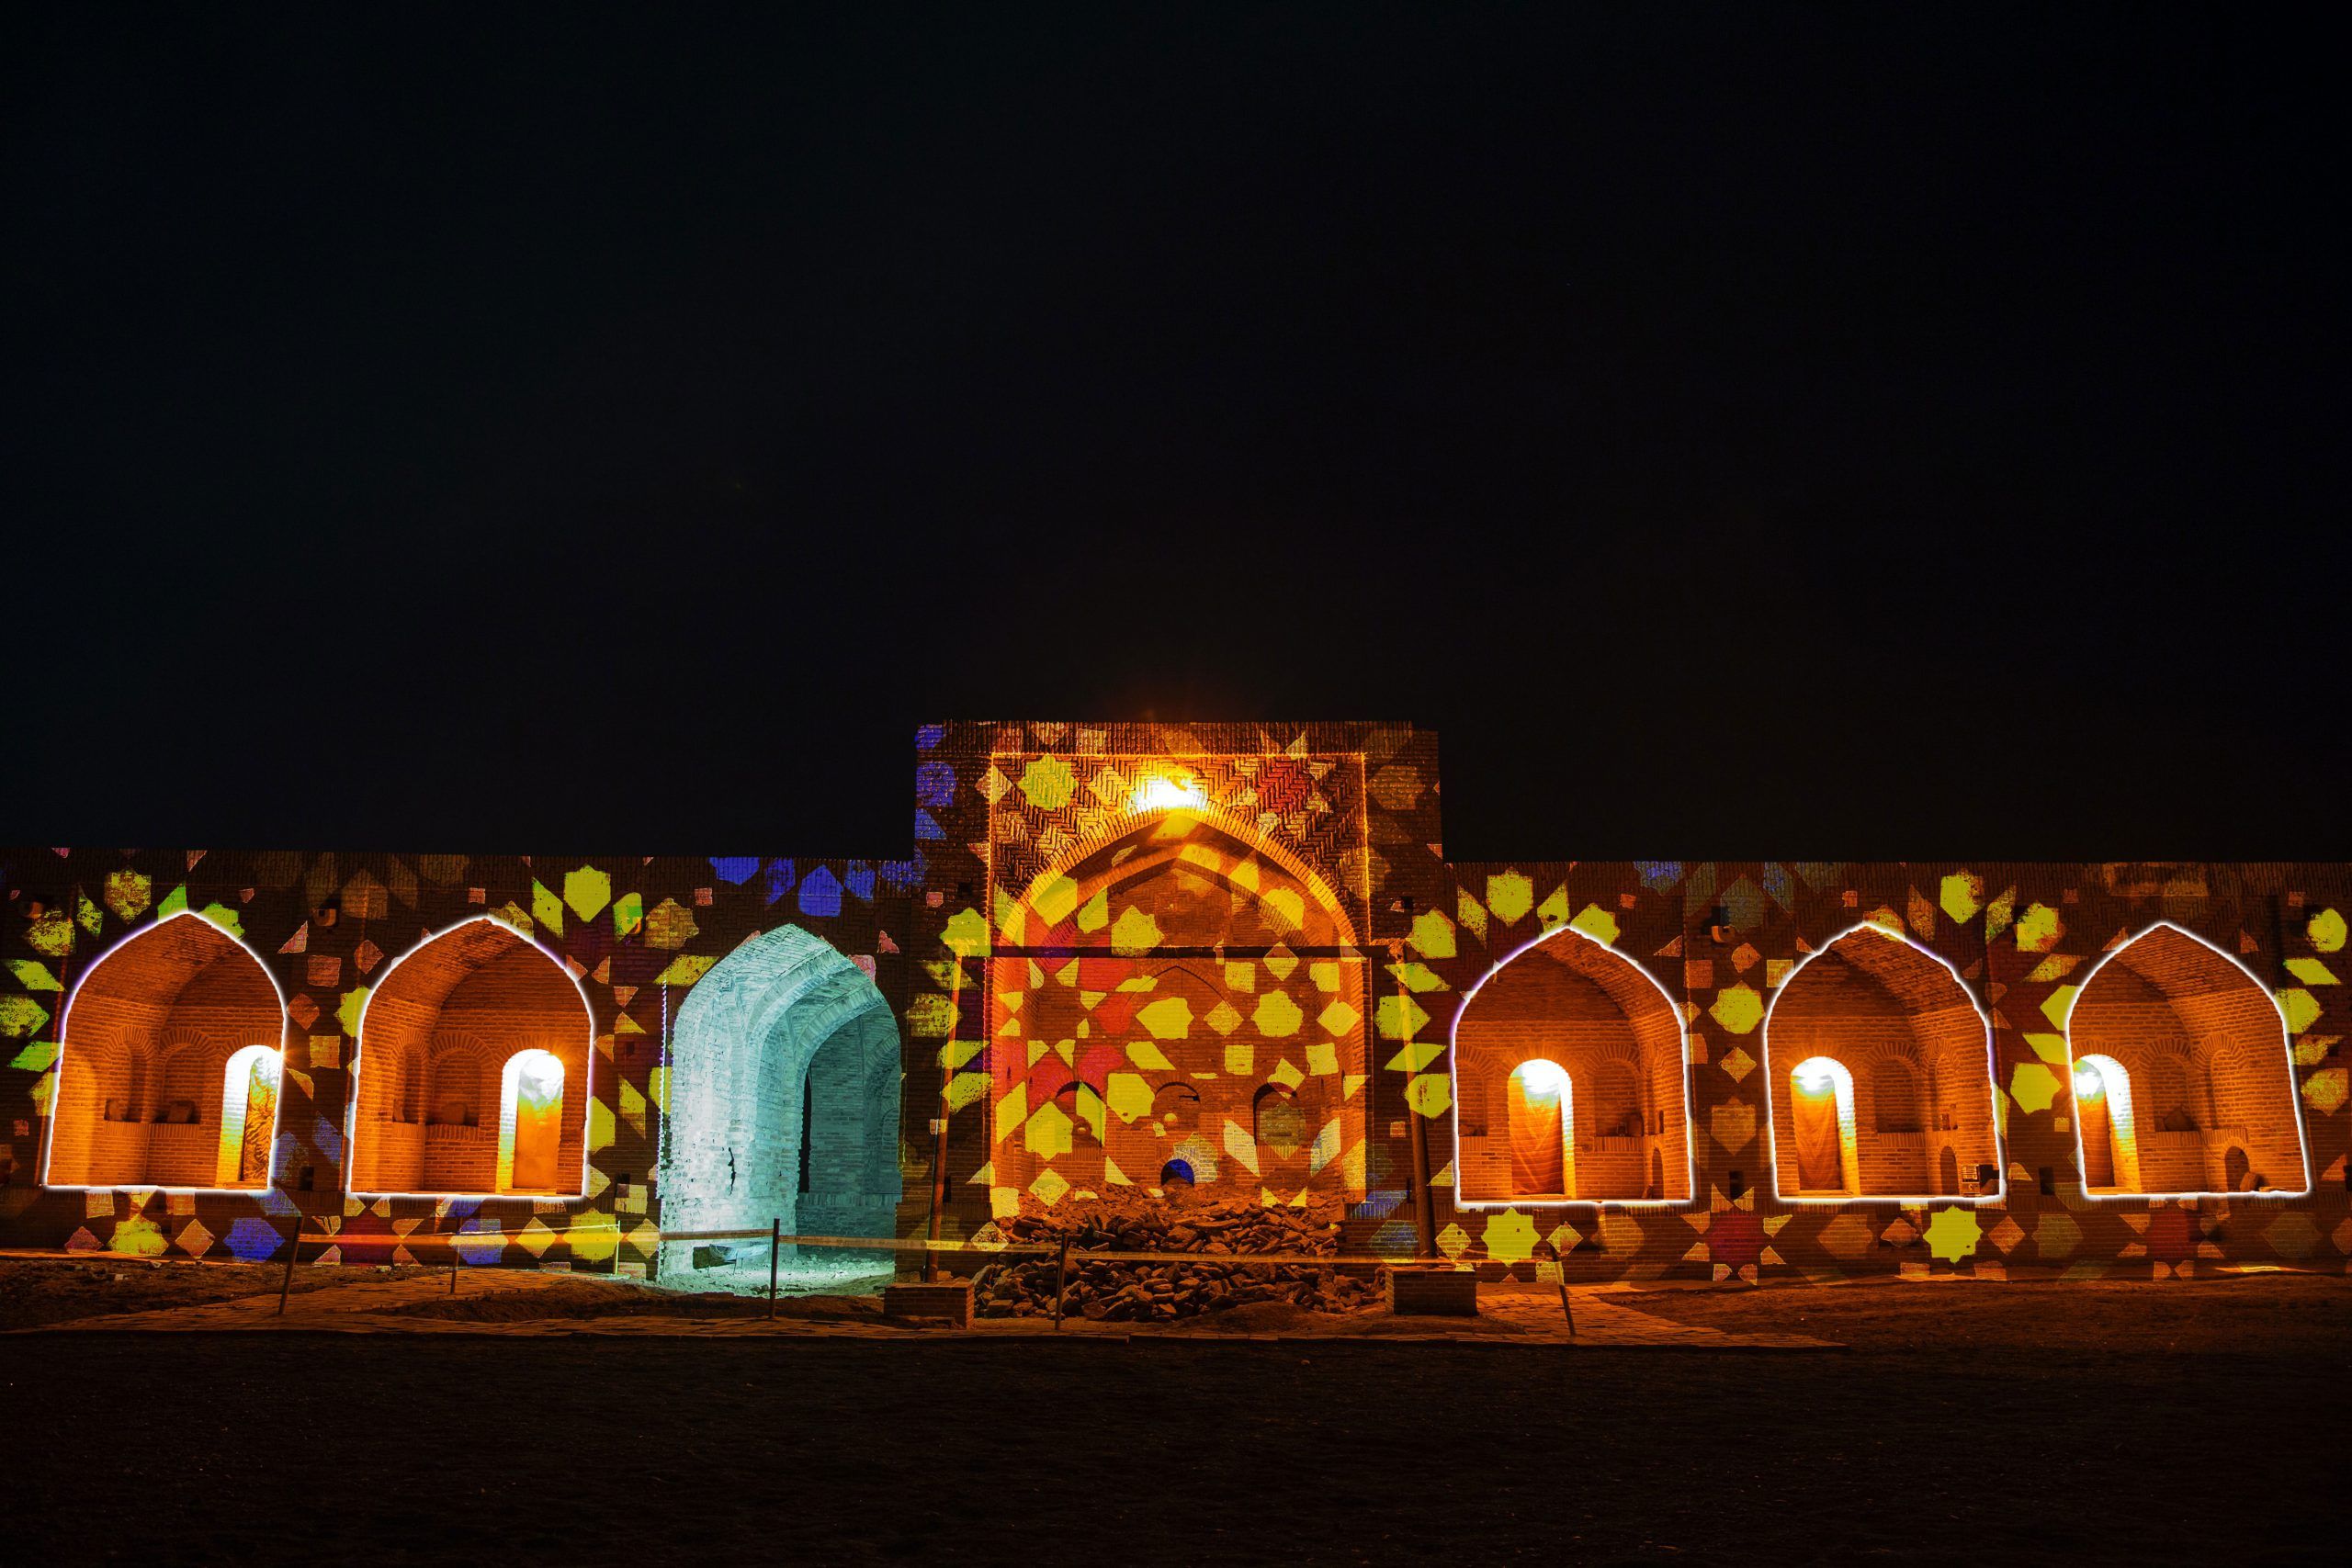 Europe Évènement - Photo of a caravanserai with projection of mosaic shapes on it and tracing of the outlines of the openings